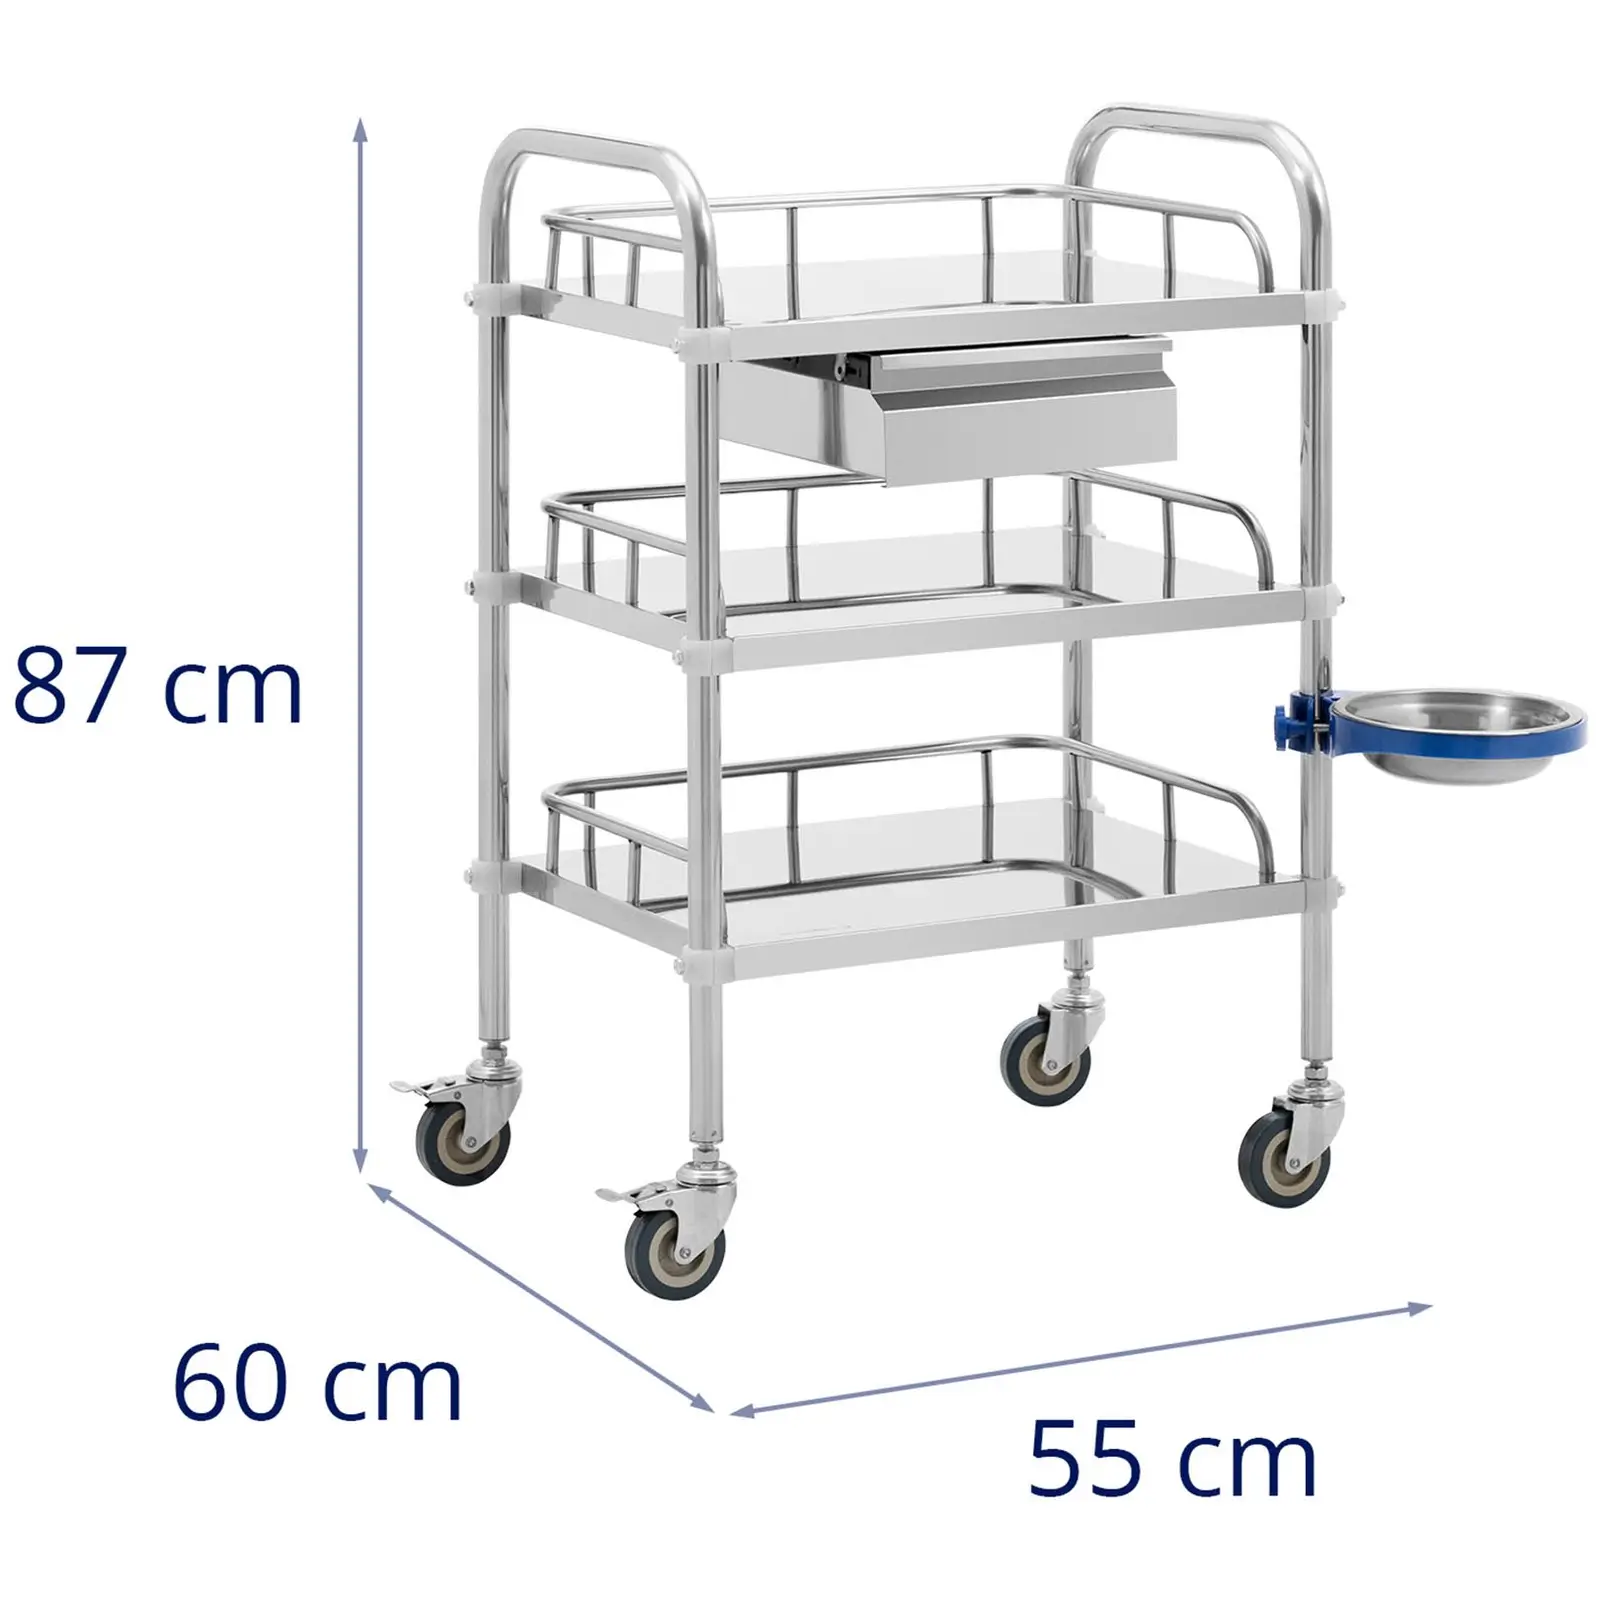 Laboratory Trolley - stainless steel - 3 shelves each 45 x 36 x 13 cm - 1 drawer - 15 kg